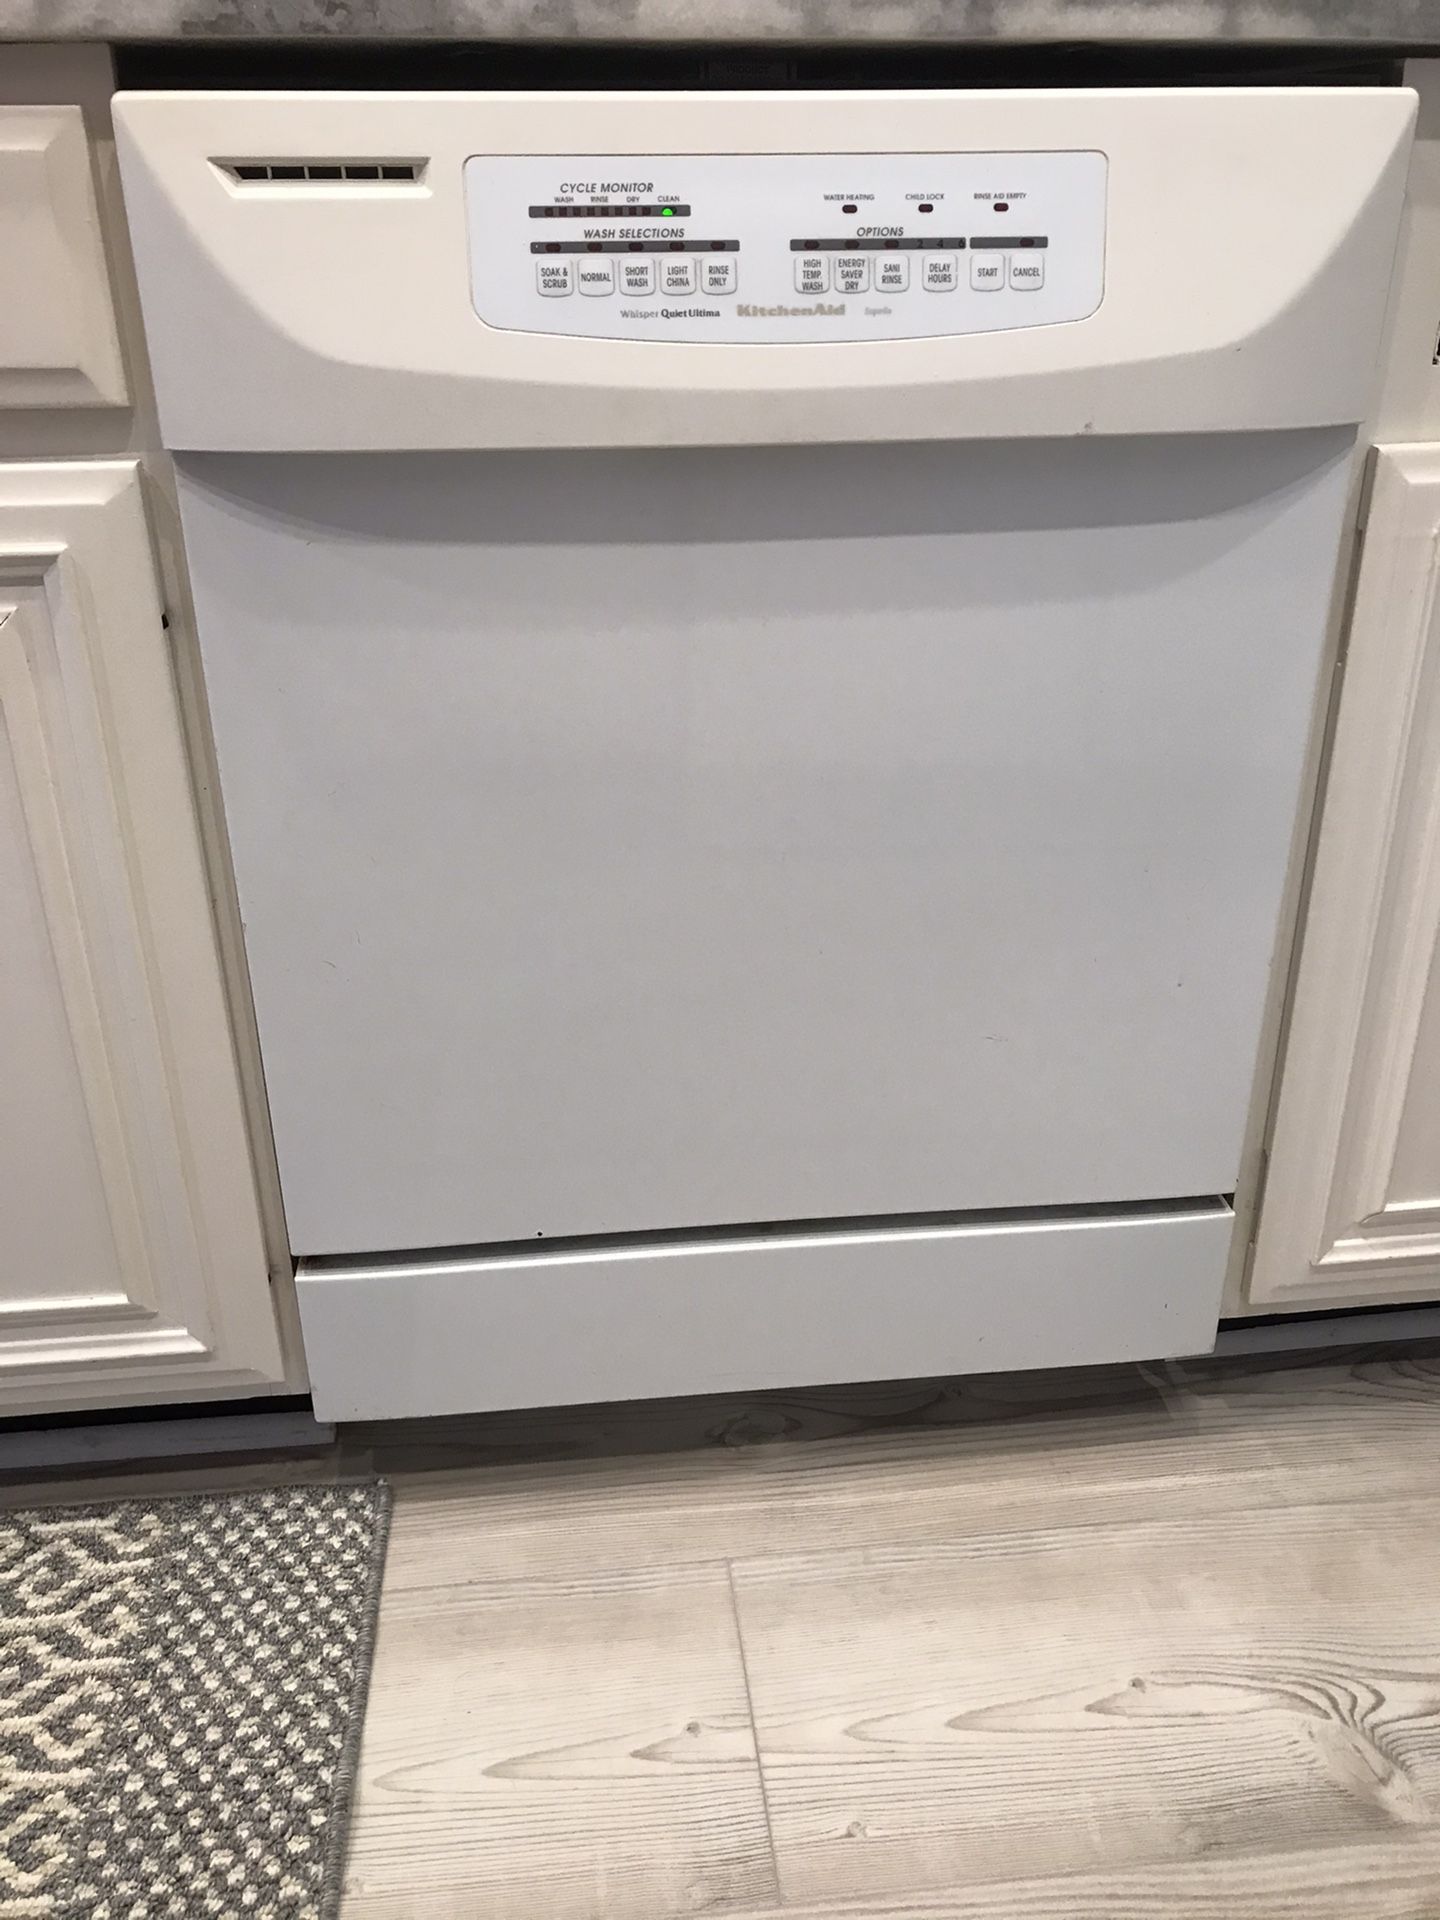 Fridge, stove, micro and dishwasher, KitchenAid fully matching appliance set, $450 FIRM for entire package, seller will help with moving and transpor